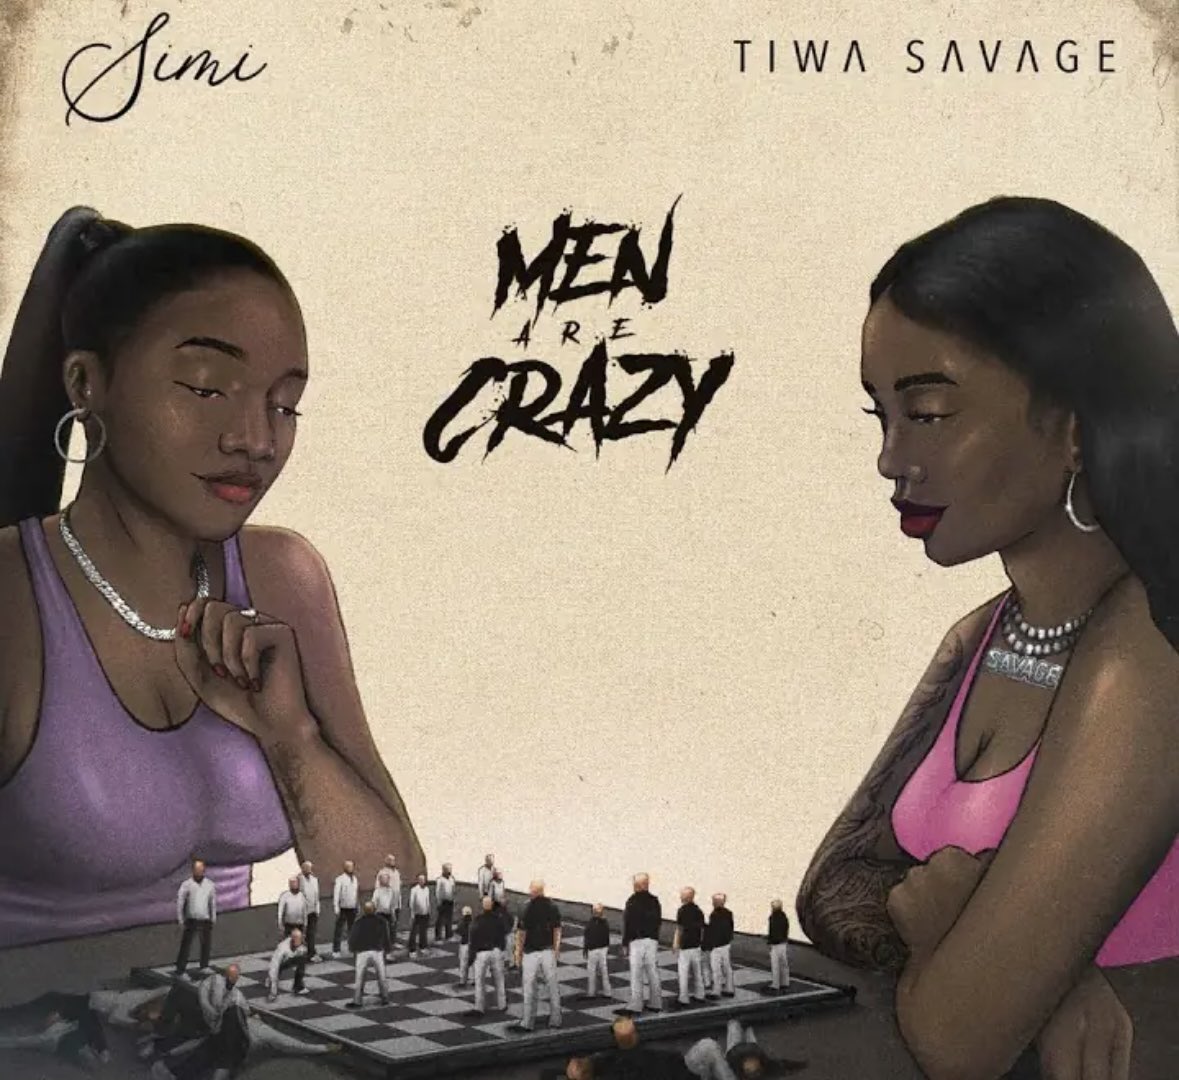 'Men Are Crazy' by @symplysimi ft. @tiwasavage is currently charting on:👇 Spotify: #49 Nigeria🇳🇬 Apple Music: #30 Sierra Leone🇸🇱 #42 Gambia🇬🇲 #43 Liberia🇱🇷 #60 Nigeria🇳🇬 #134 Ghana🇬🇭 KEEP STREAMING GUYS❤️ simi-us.ffm.to/mac